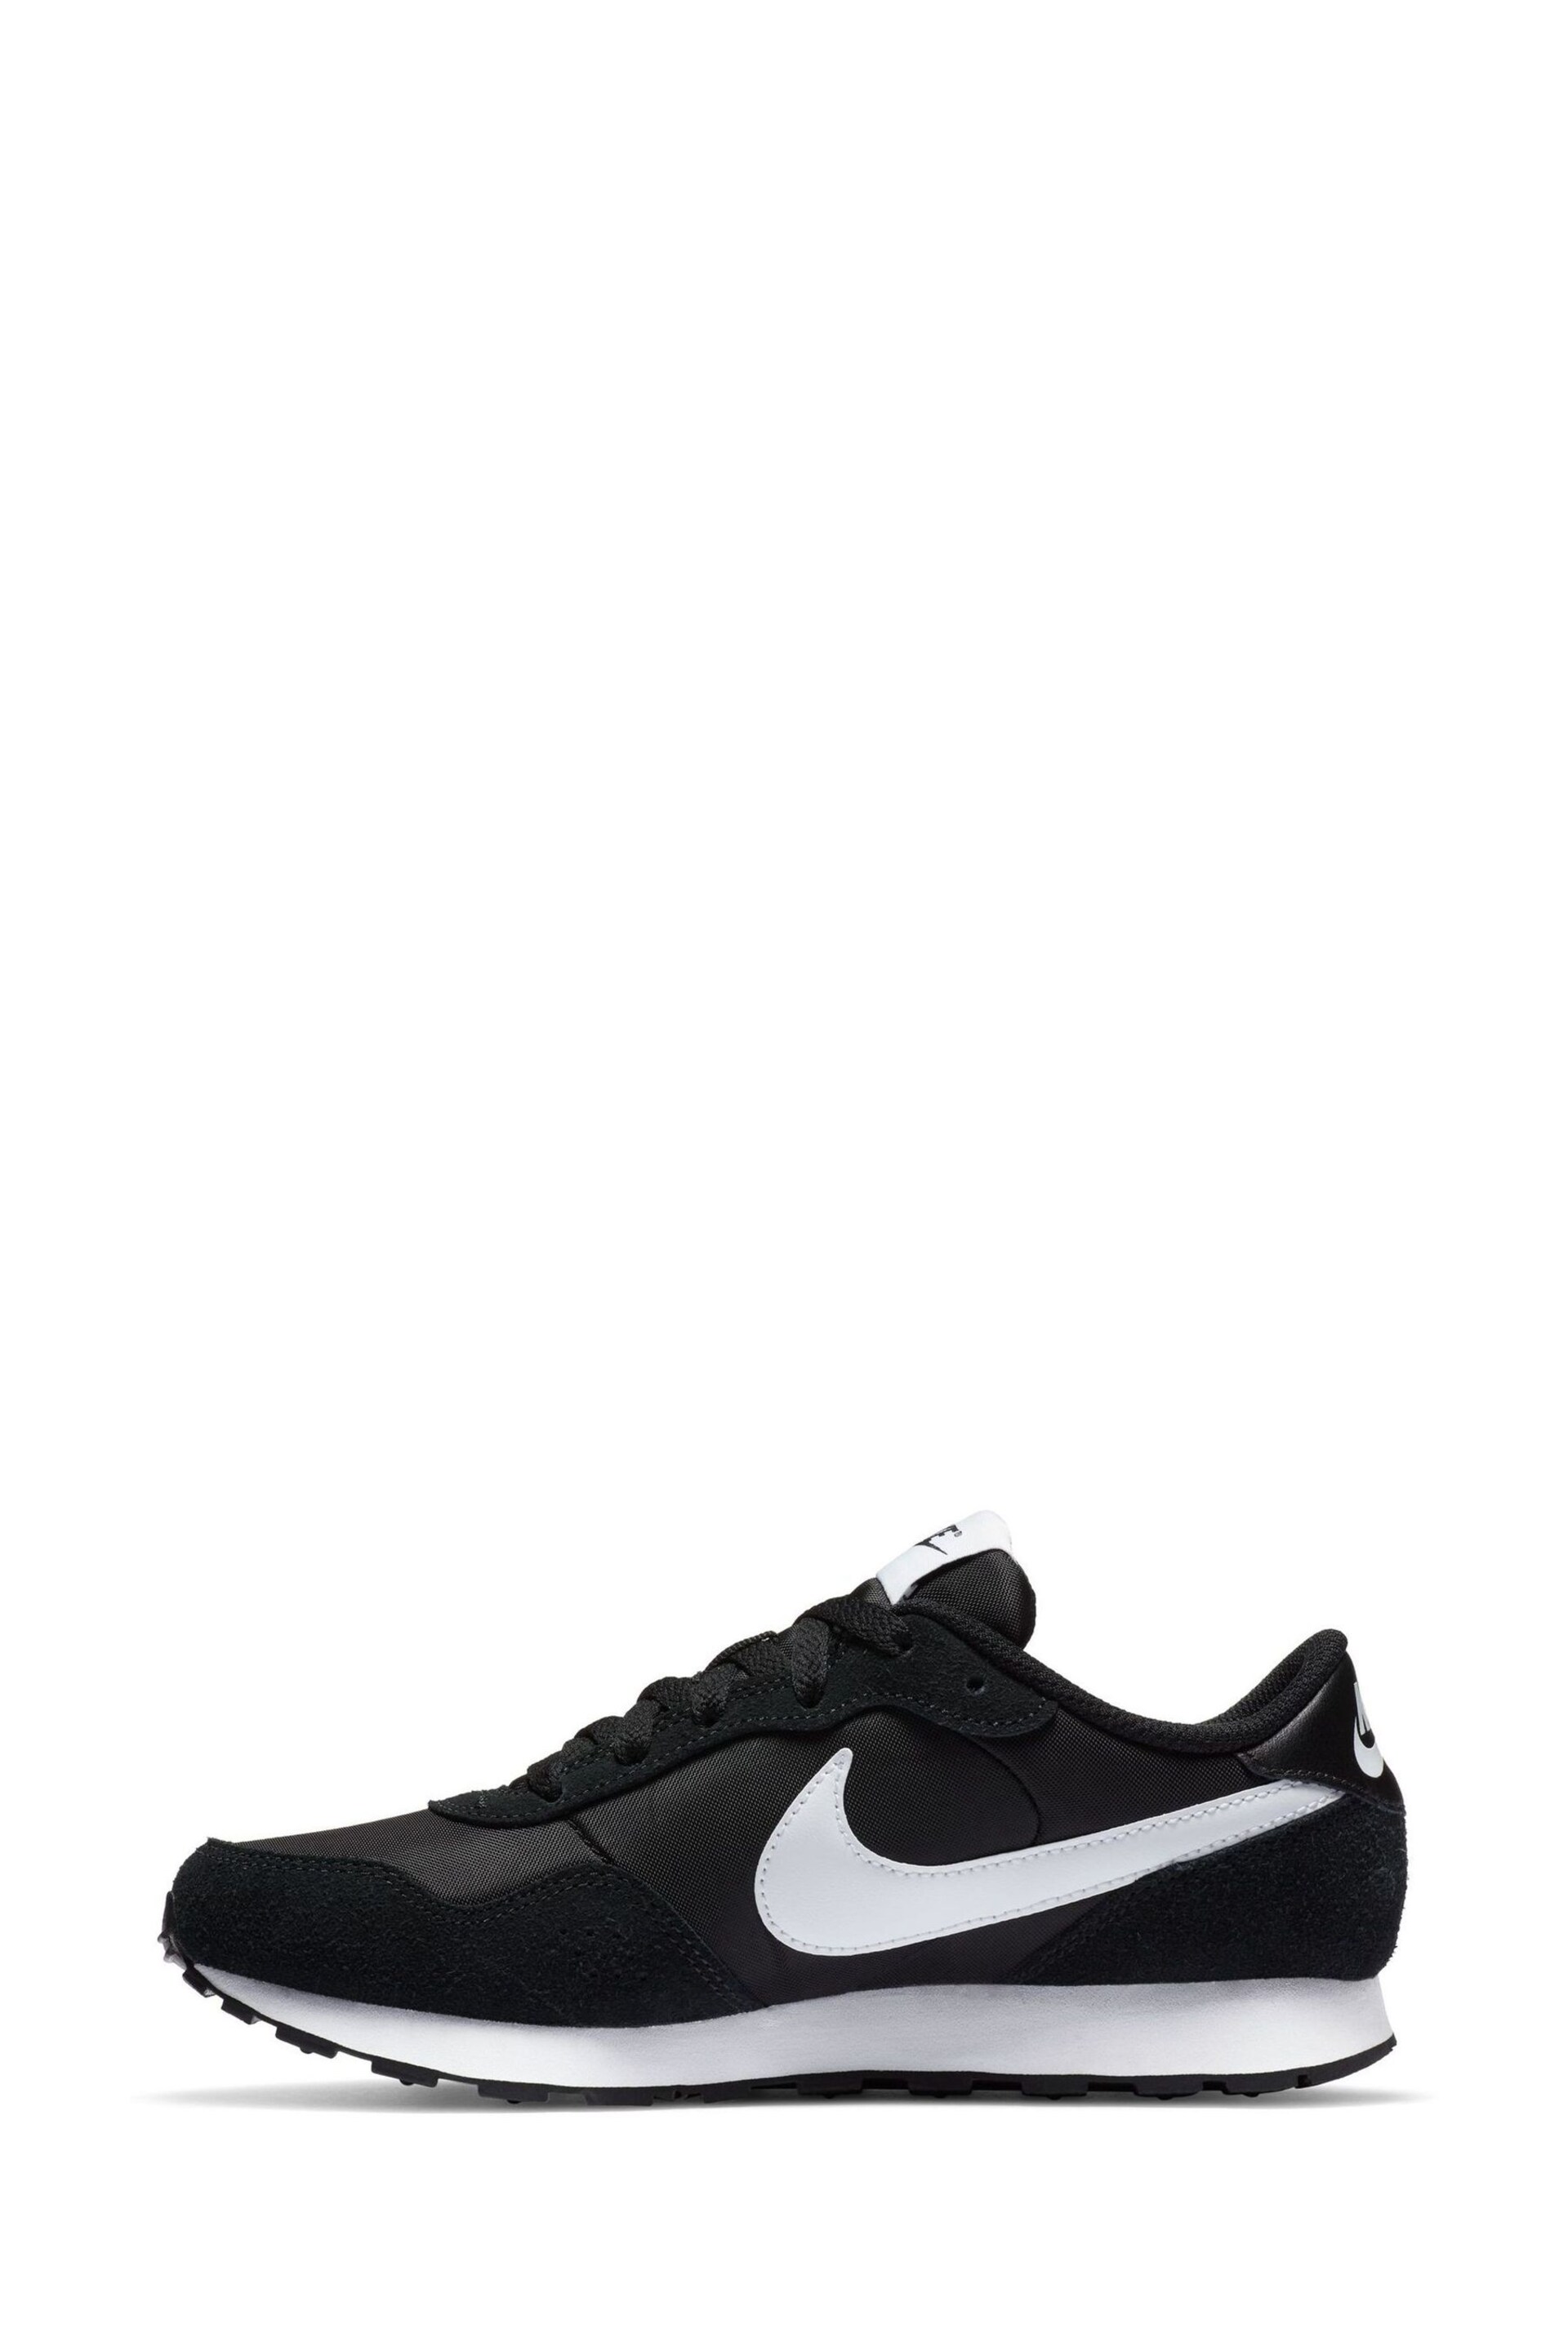 Nike Black/White Youth MD Valiant Trainers - Image 2 of 10